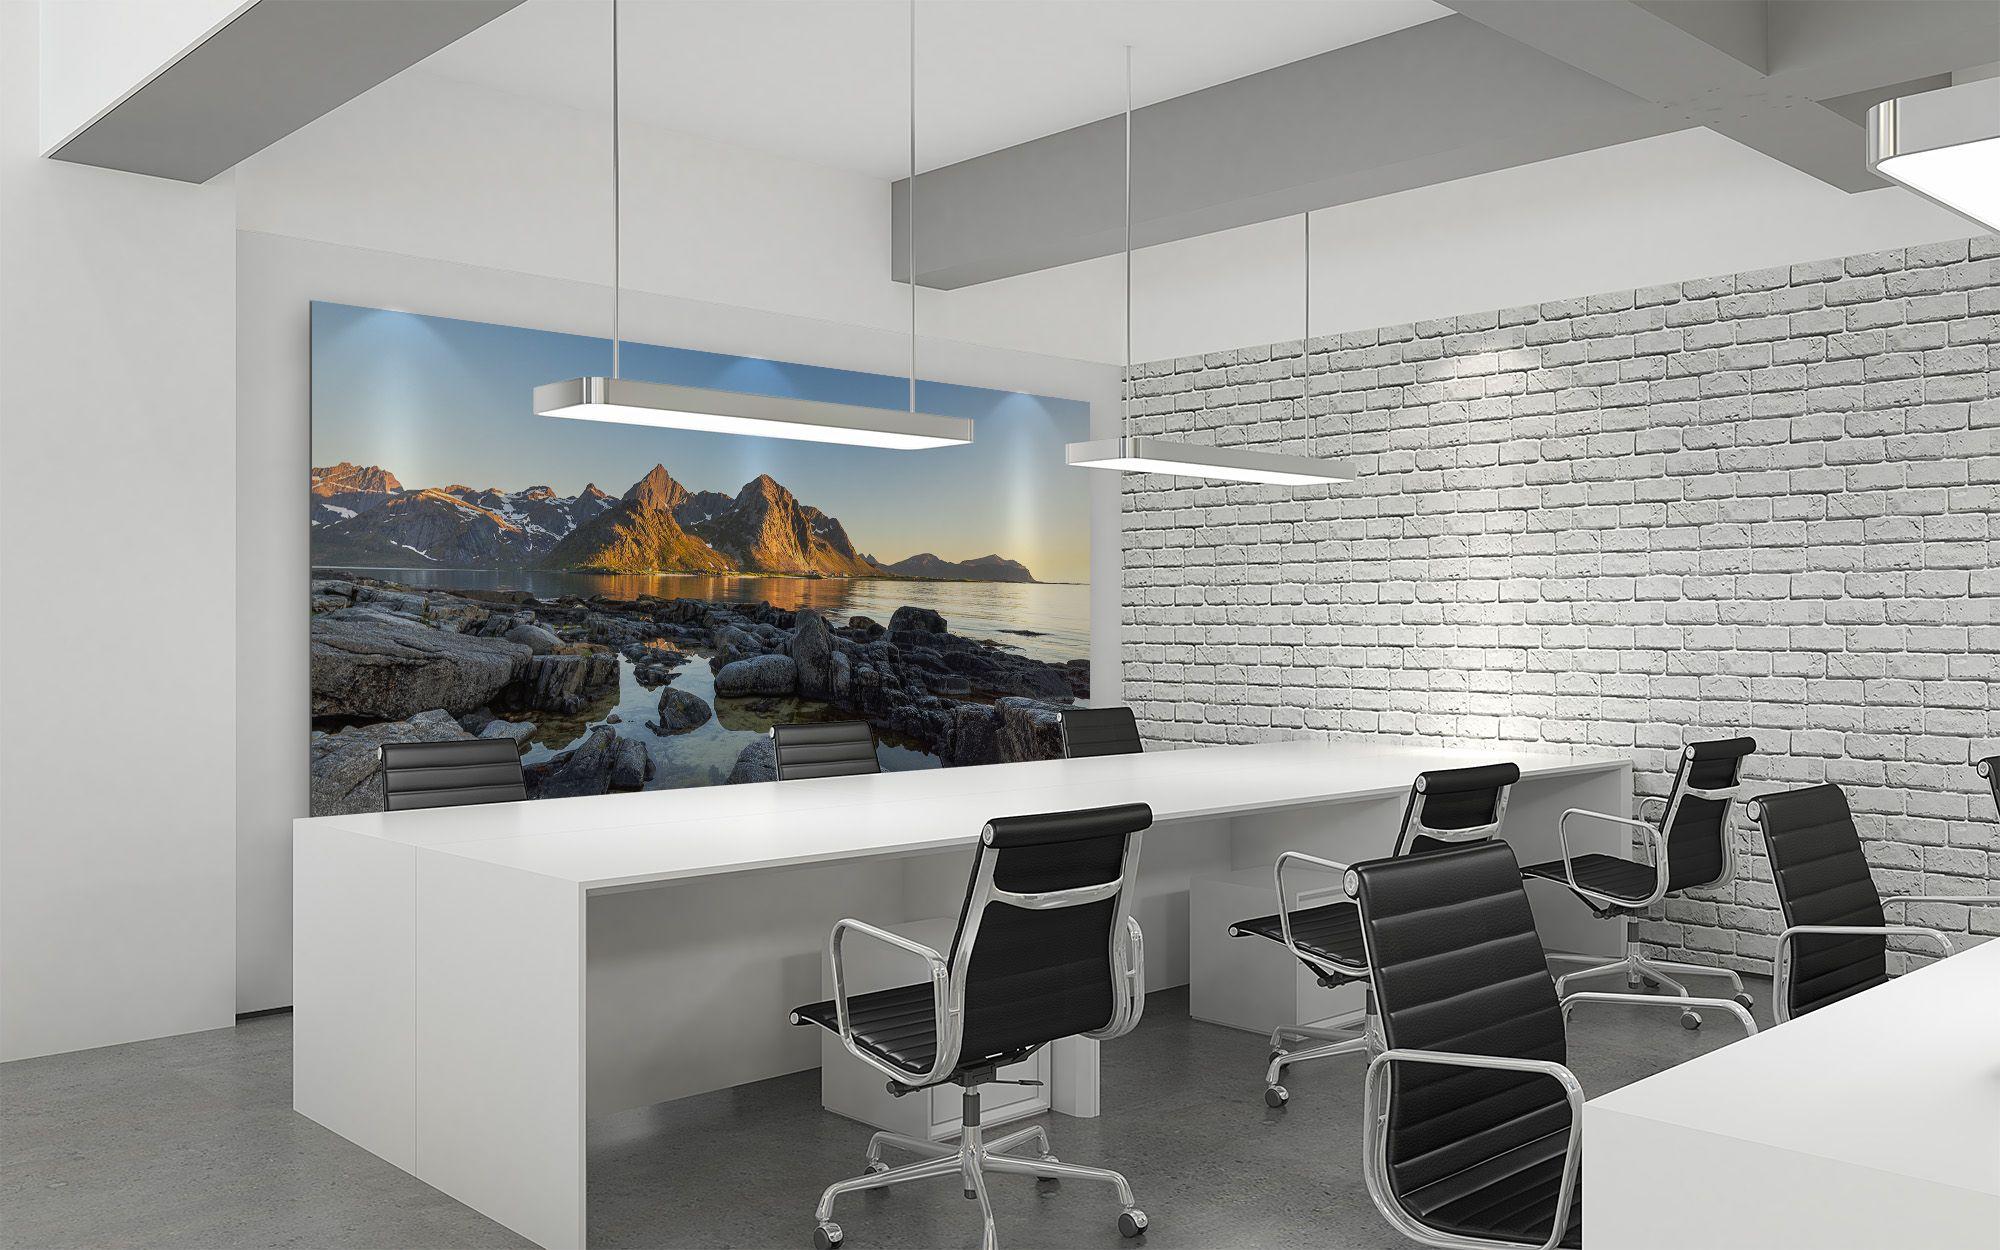 Stylishly decorate offices and workplaces with our exclusive wall art.